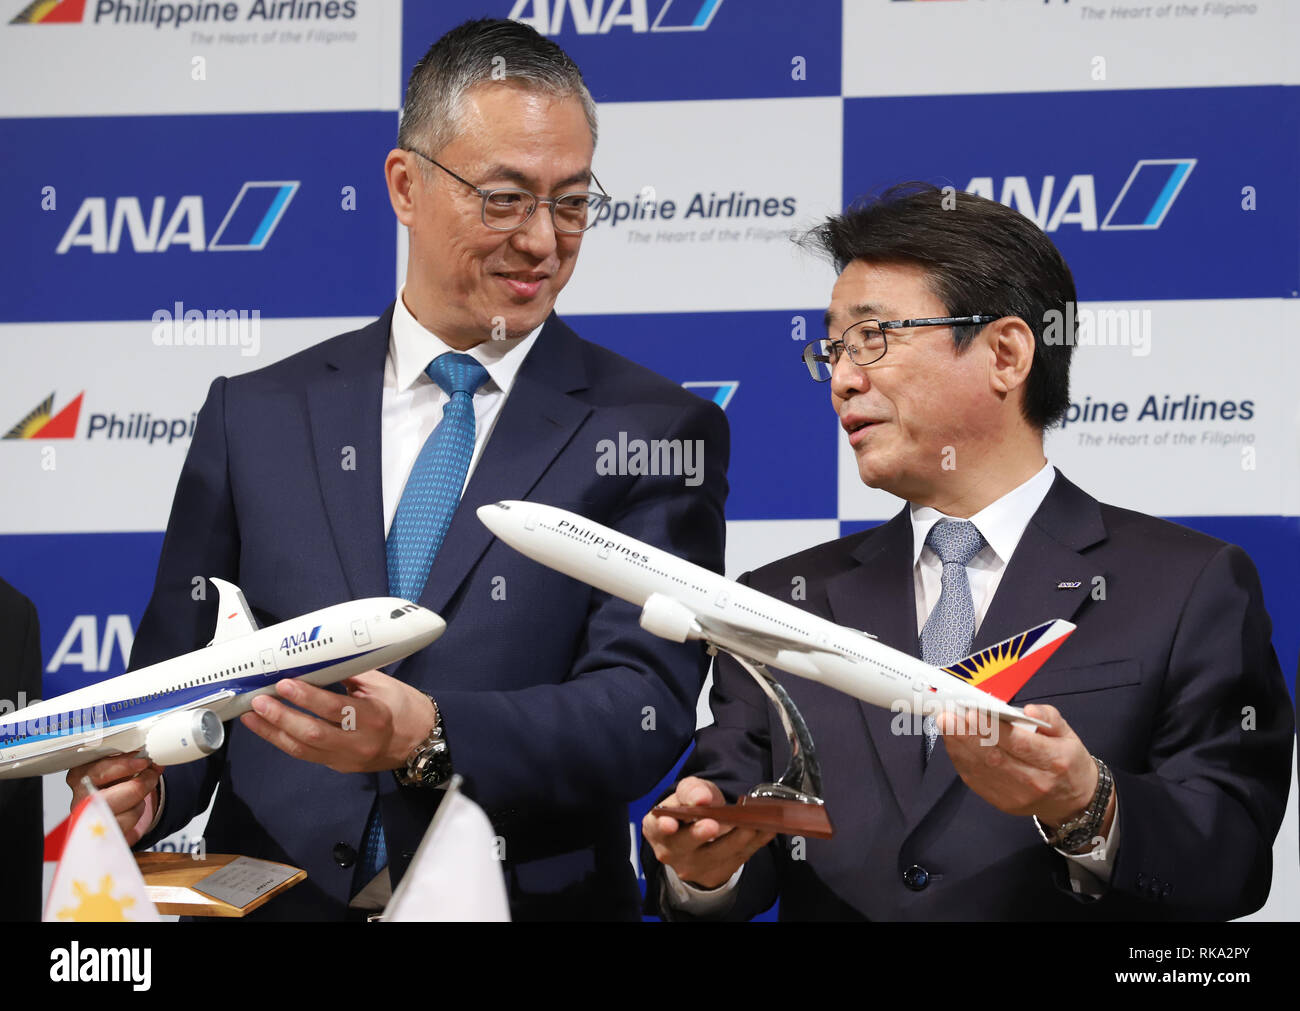 Tokyo, Japan. 8th Feb, 2019. LT Group president and PAL Holdings director Michael Tan (L) shares smiles with ANA Holdings president Shinya Katanozaka as they announce the companies expand their partnerships in Tokyo on Friday, February 8, 2019. ANA Holdings will invest 95 million U.S. dollars to PAL Holdings and acquire 9.5 percent of PAL Holdings shares. Credit: Yoshio Tsunoda/AFLO/Alamy Live News Stock Photo